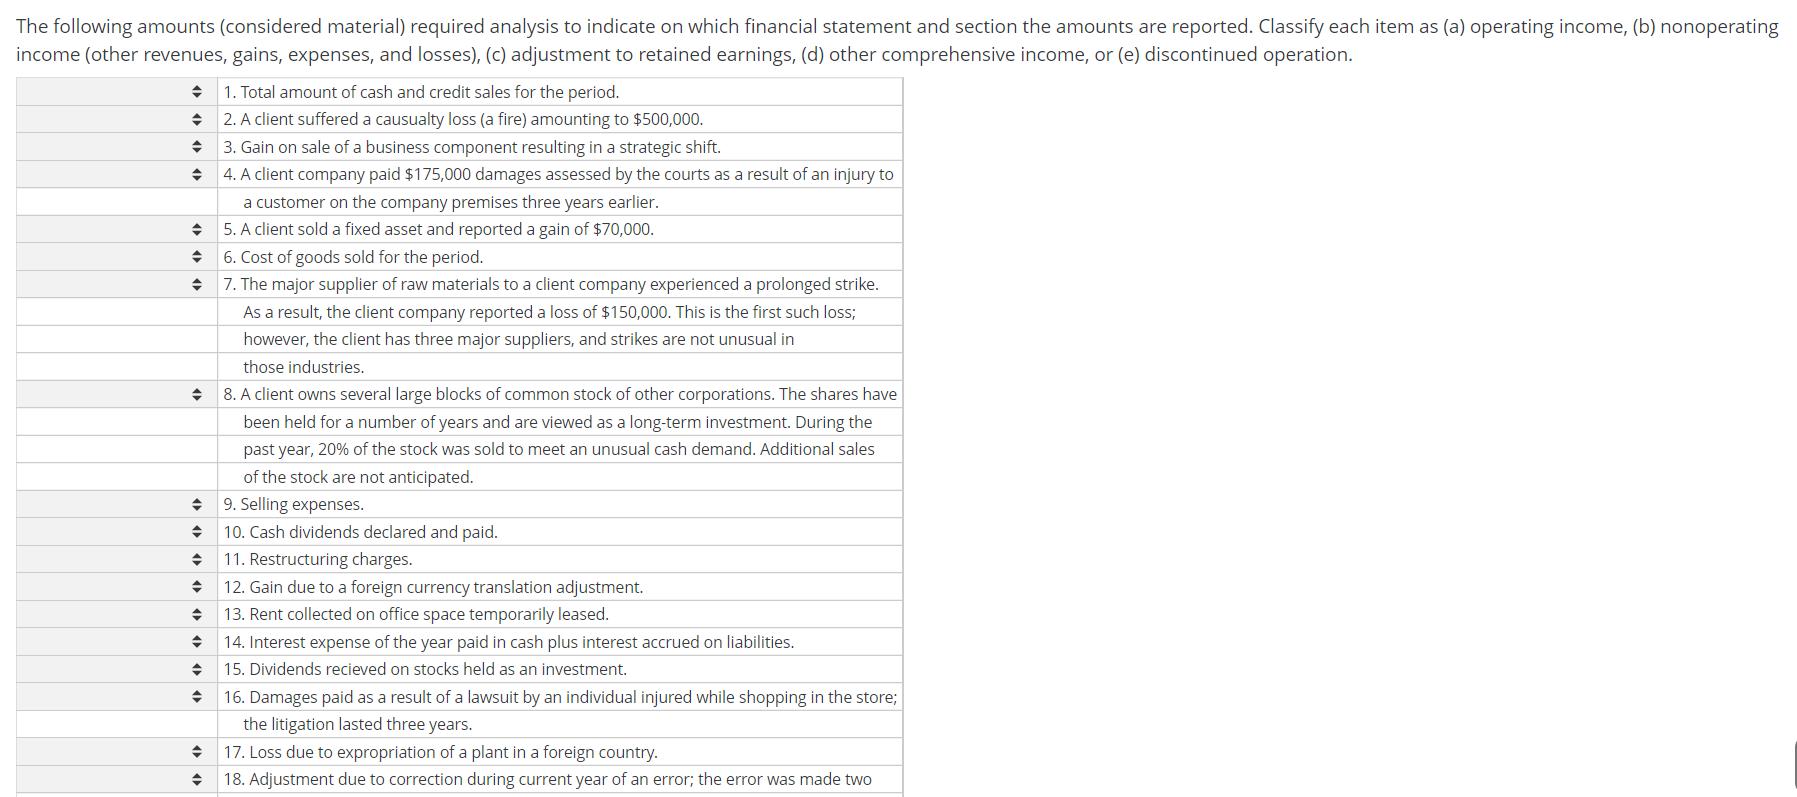 The following amounts (considered material) required analysis to indicate on which financial statement and section the amount